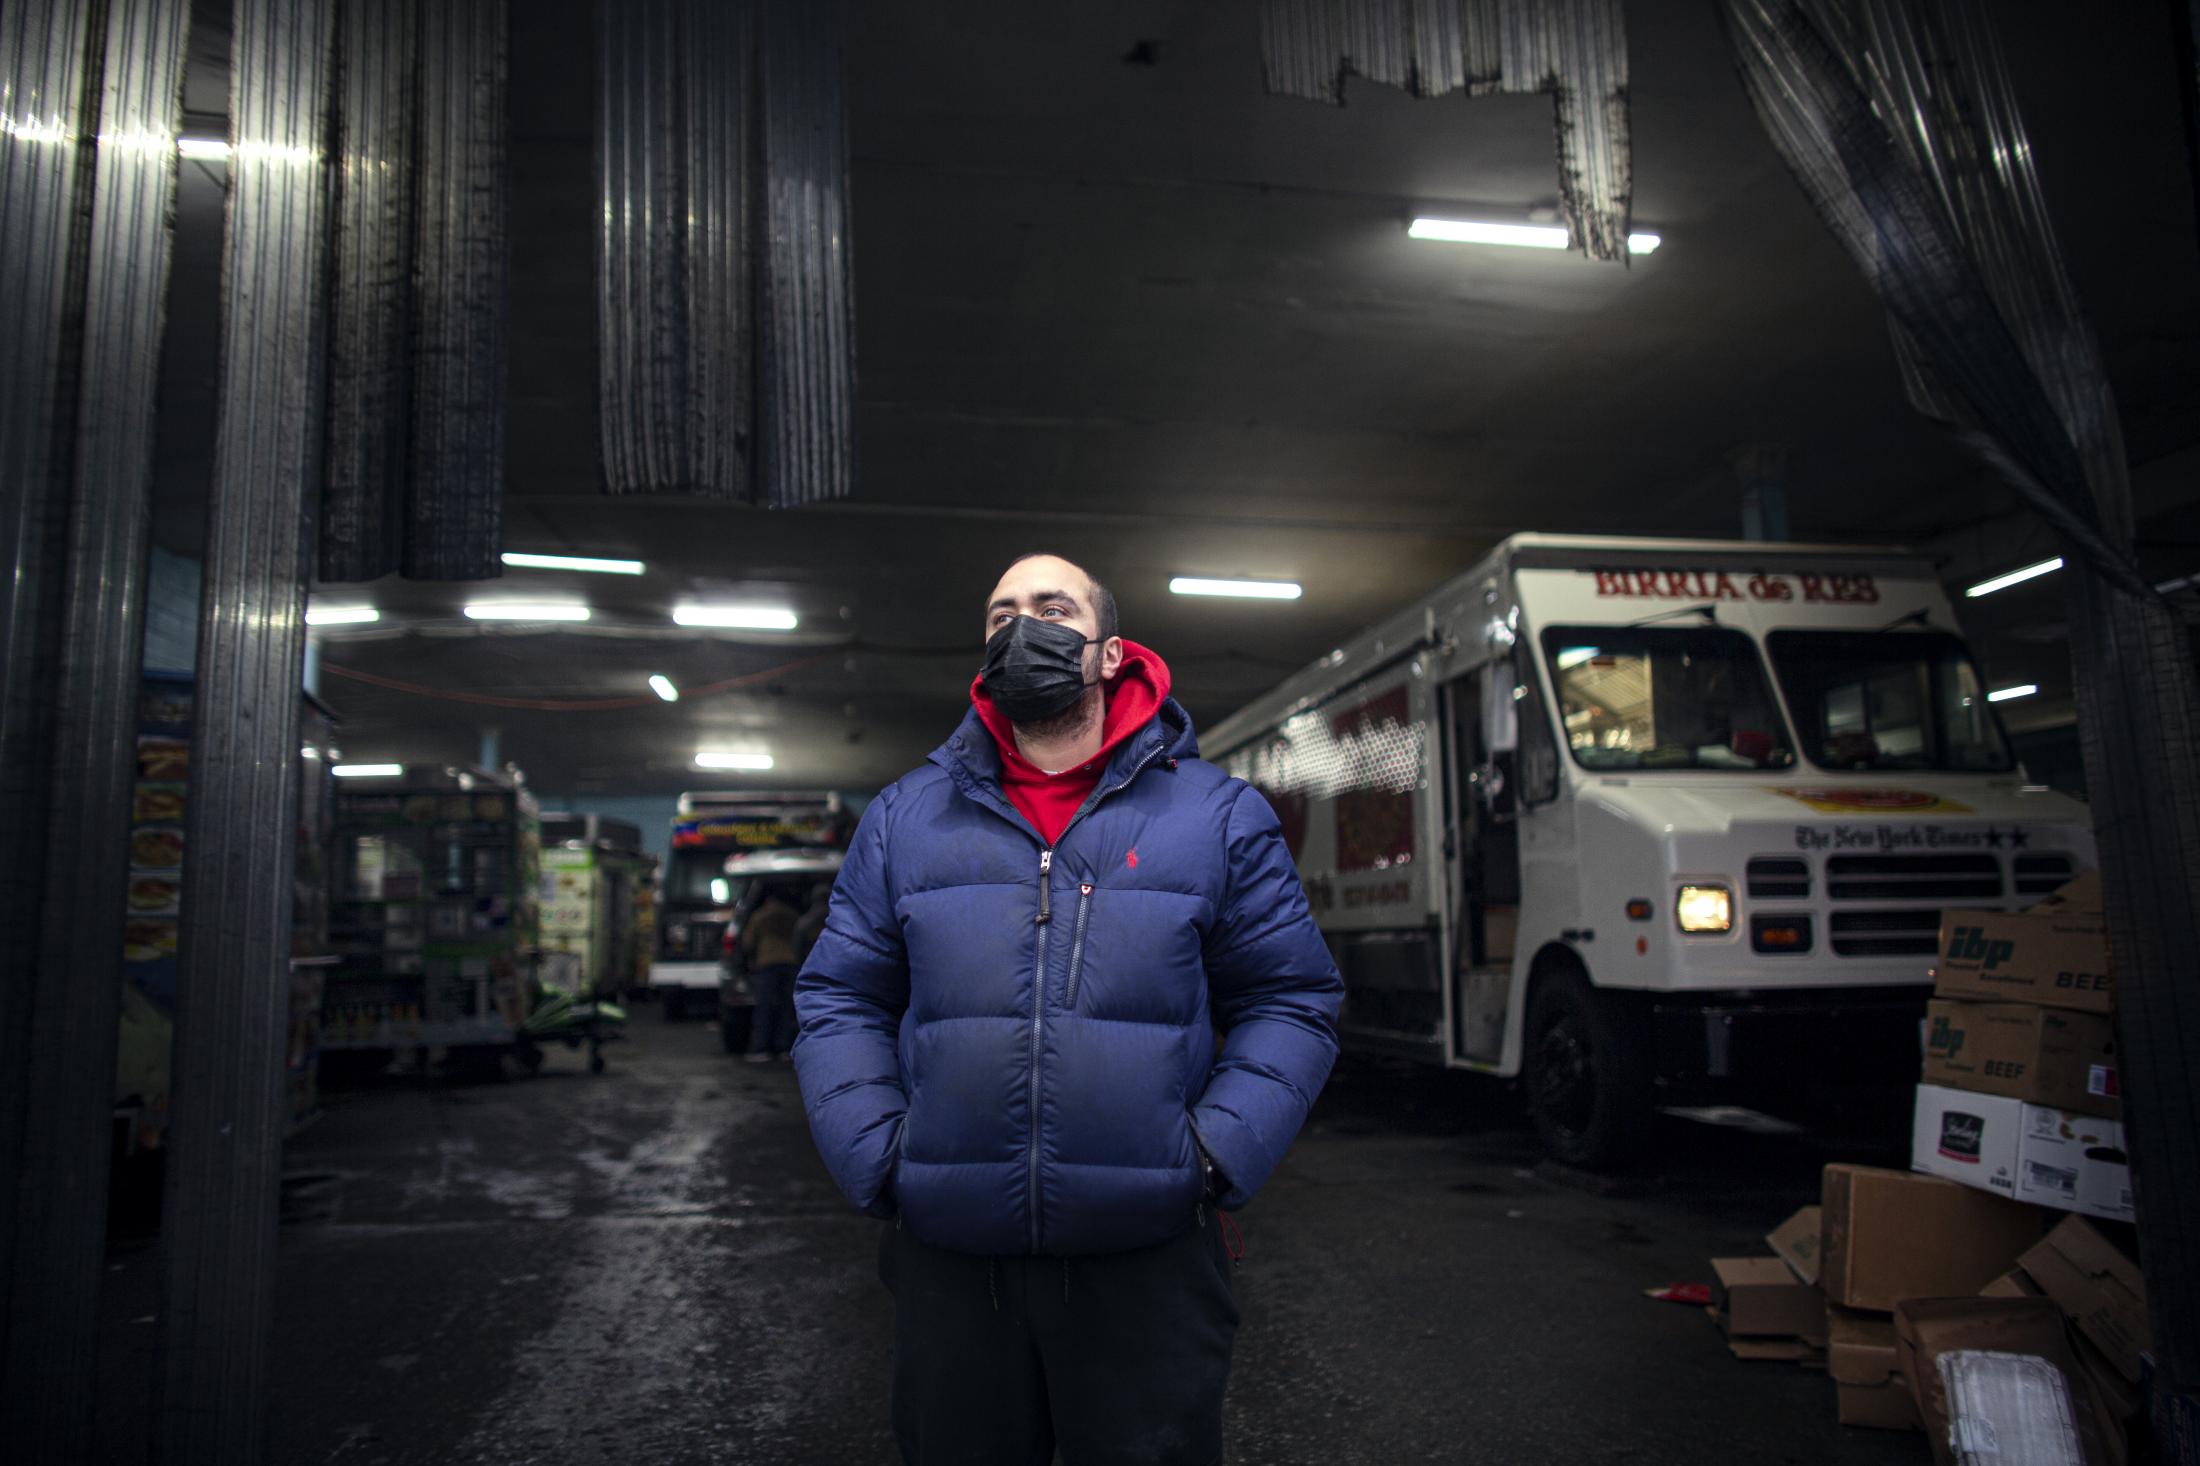 Mahmoud Ibrahim, a second generation Egyptian from Queens, poses for a photo at the commissary on Tuesday, January 26, 2020. Ibrahim and his family are among the street vendors who have been forced to close their business due to difficulty obtaining licenses to sell food on the street.